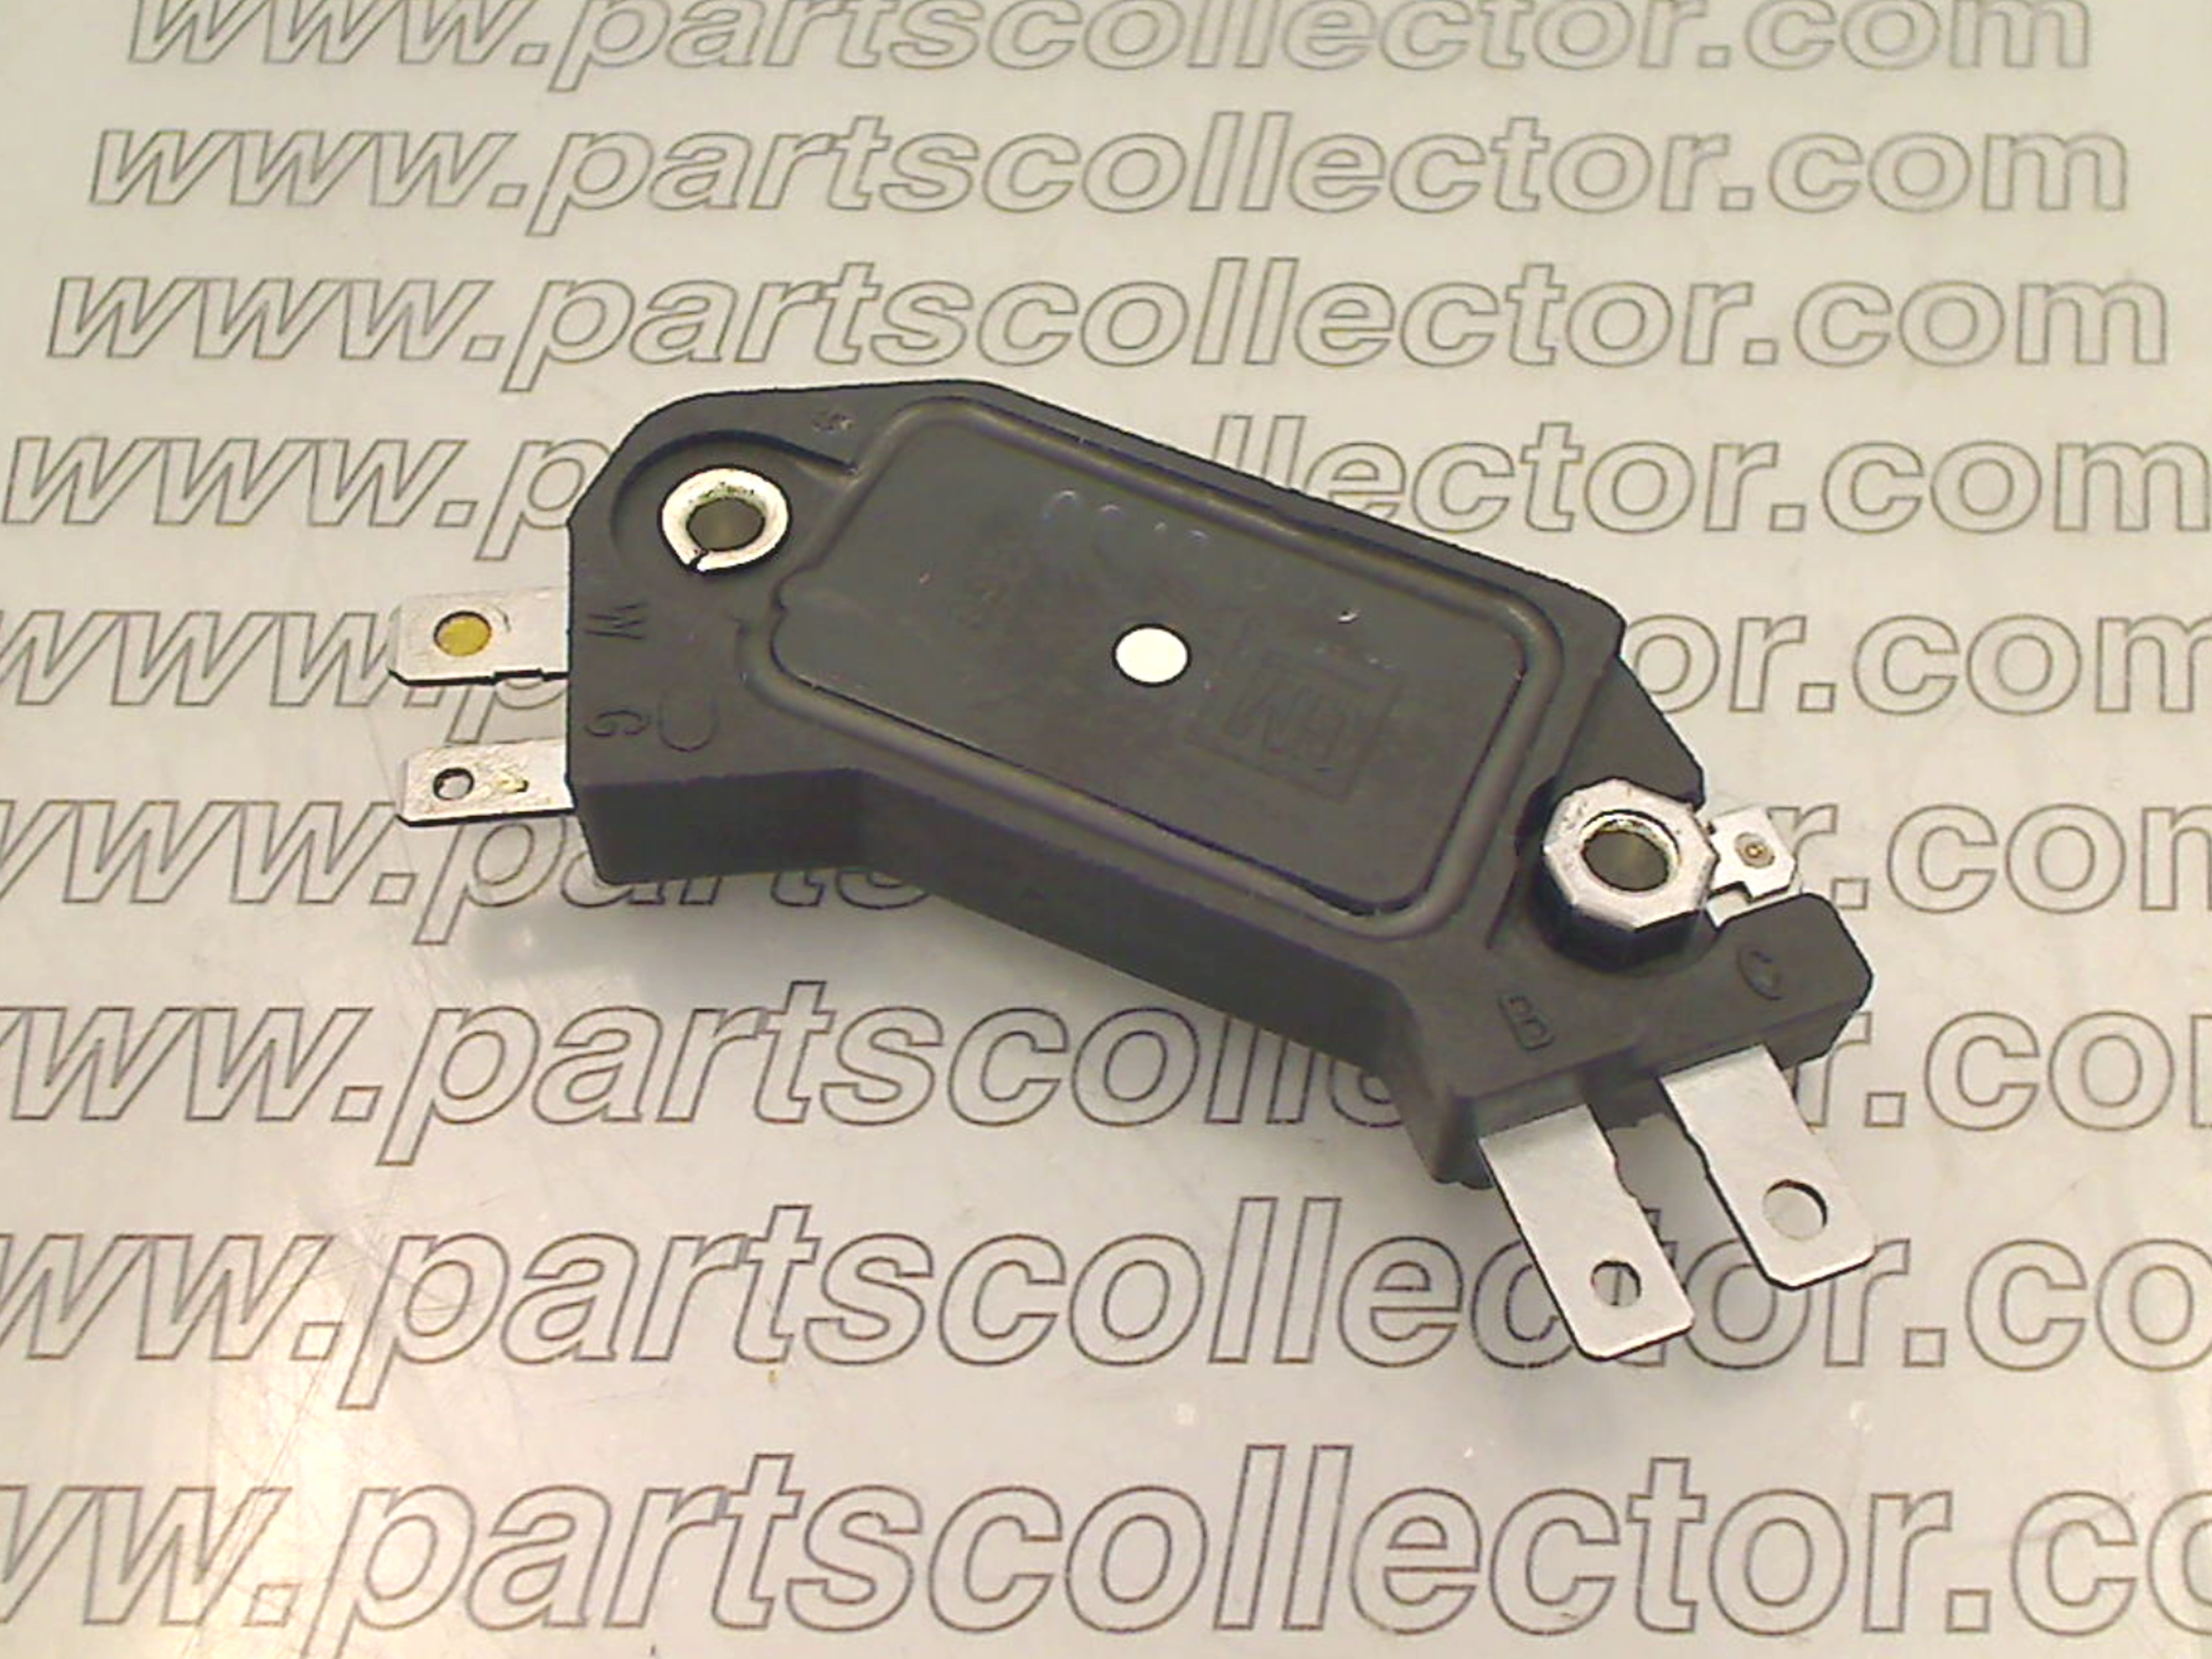 IGNITION MODULE